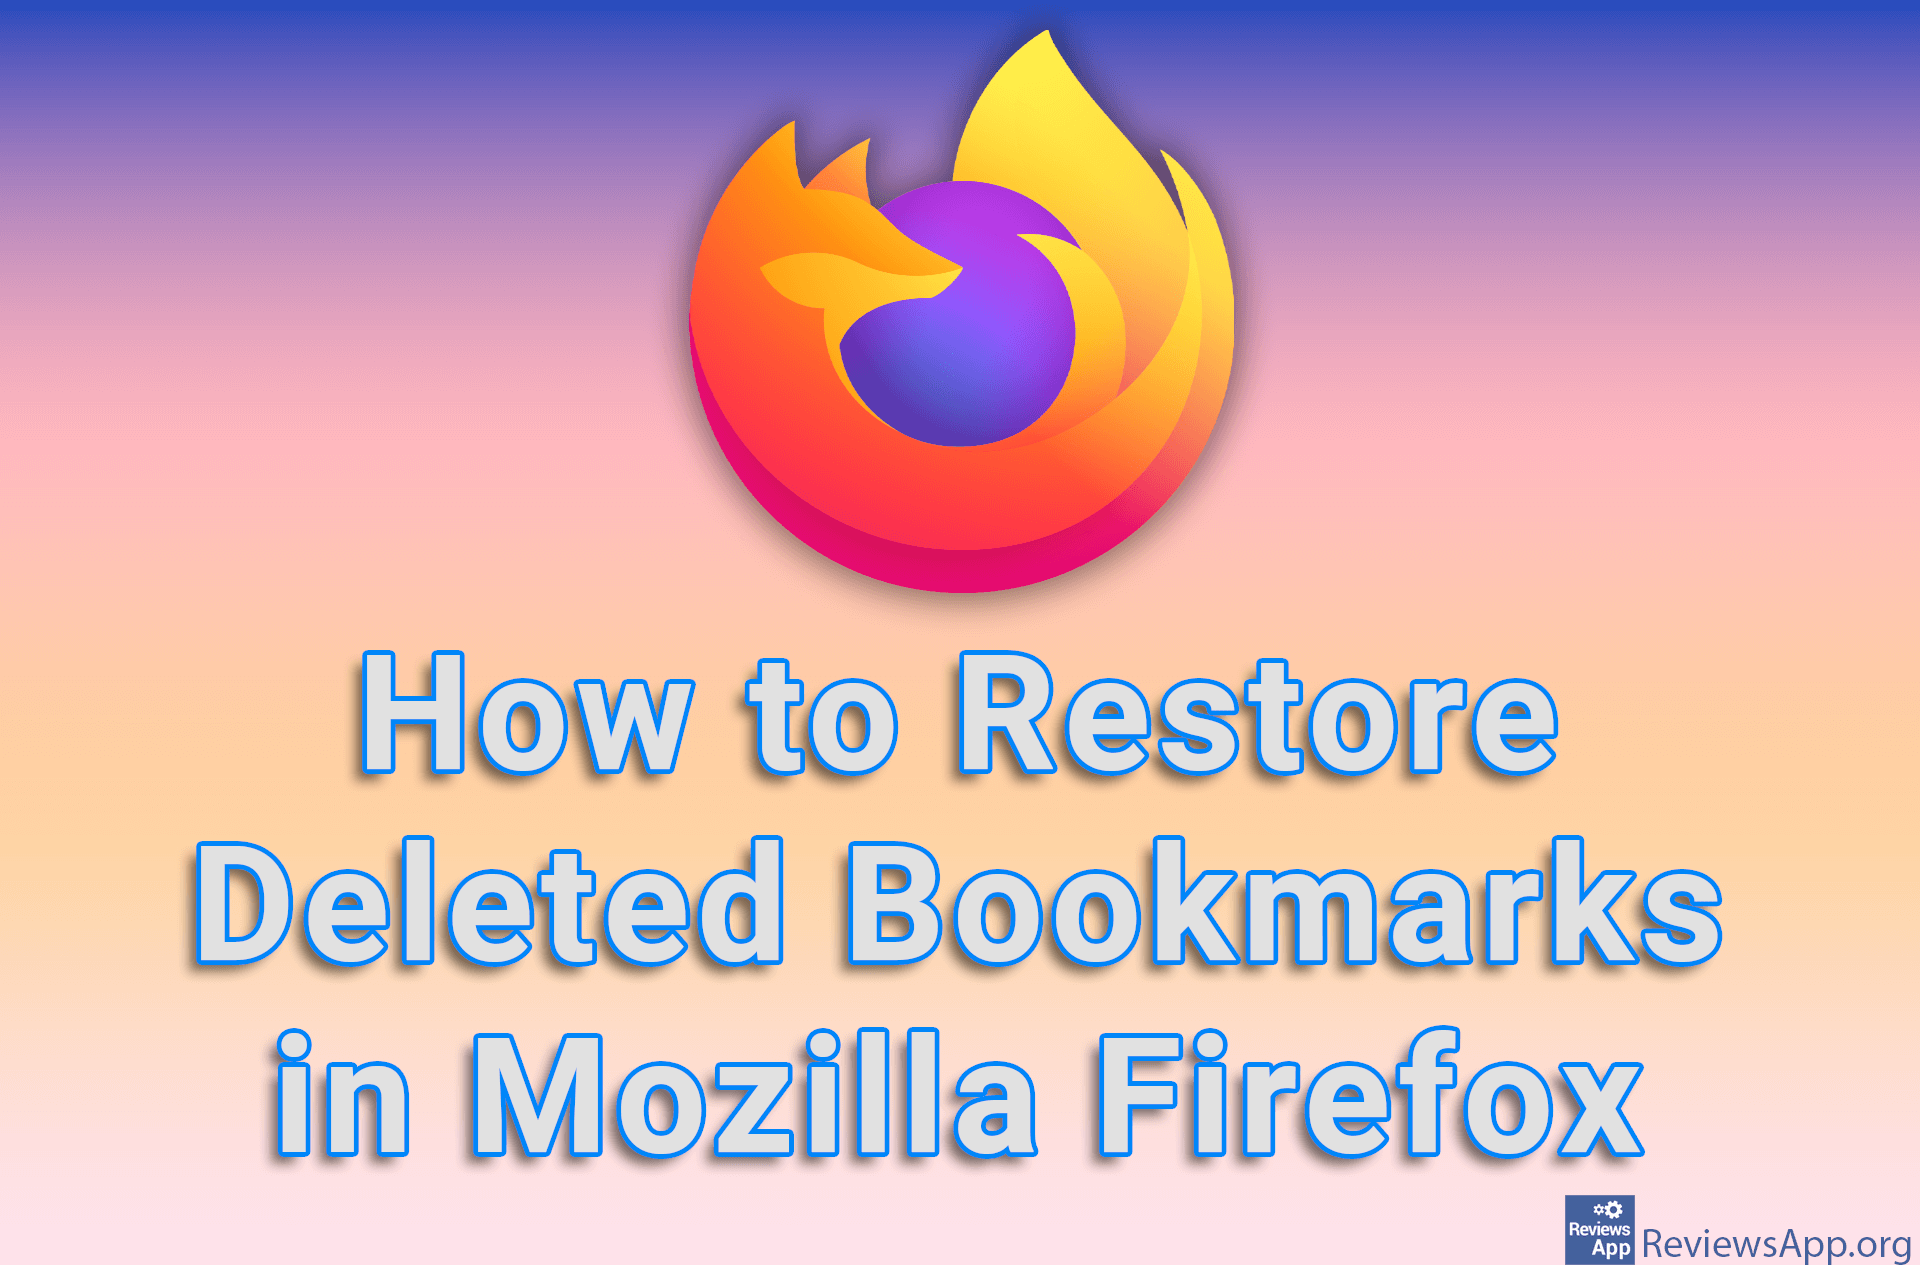 How to Restore Deleted Bookmarks in Mozilla Firefox